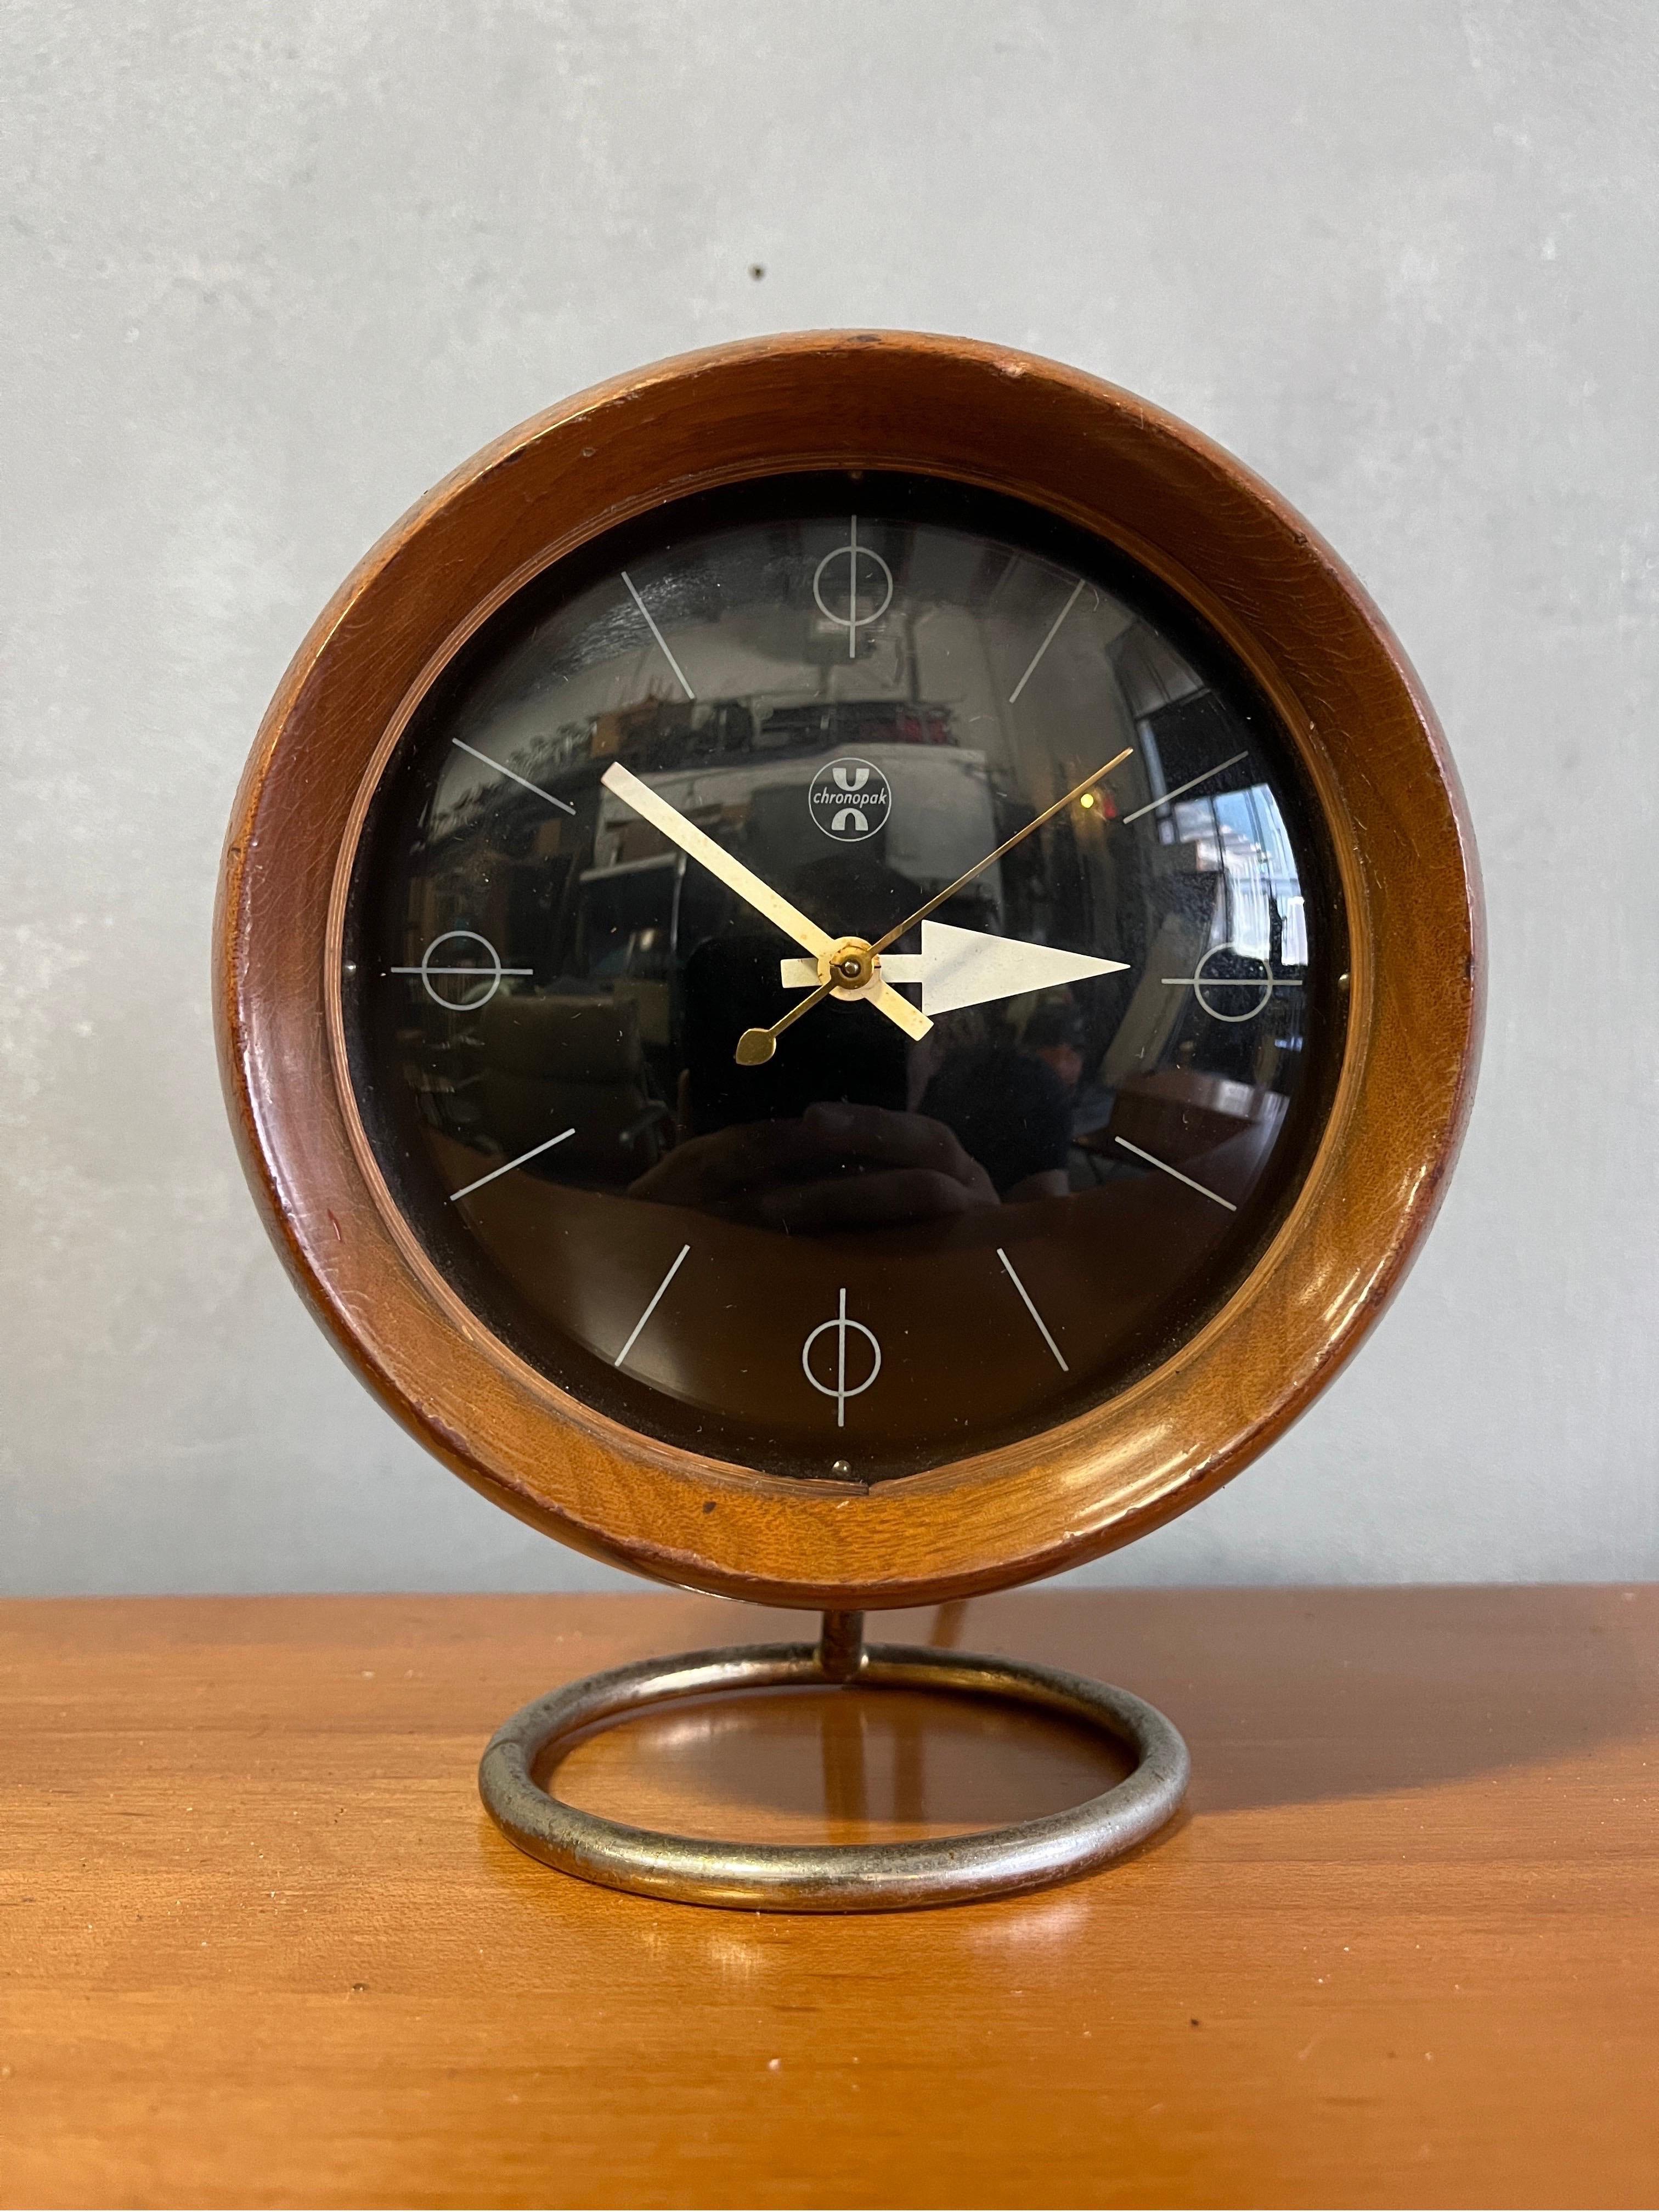 Howard Miller Chronopak desk / table clock designed by George Nelson 1950's. In all original / unmolested condition with cord and tested. Runs beautifully with a sweeping hand. Label present. Classic and iconic by one of the great designers for